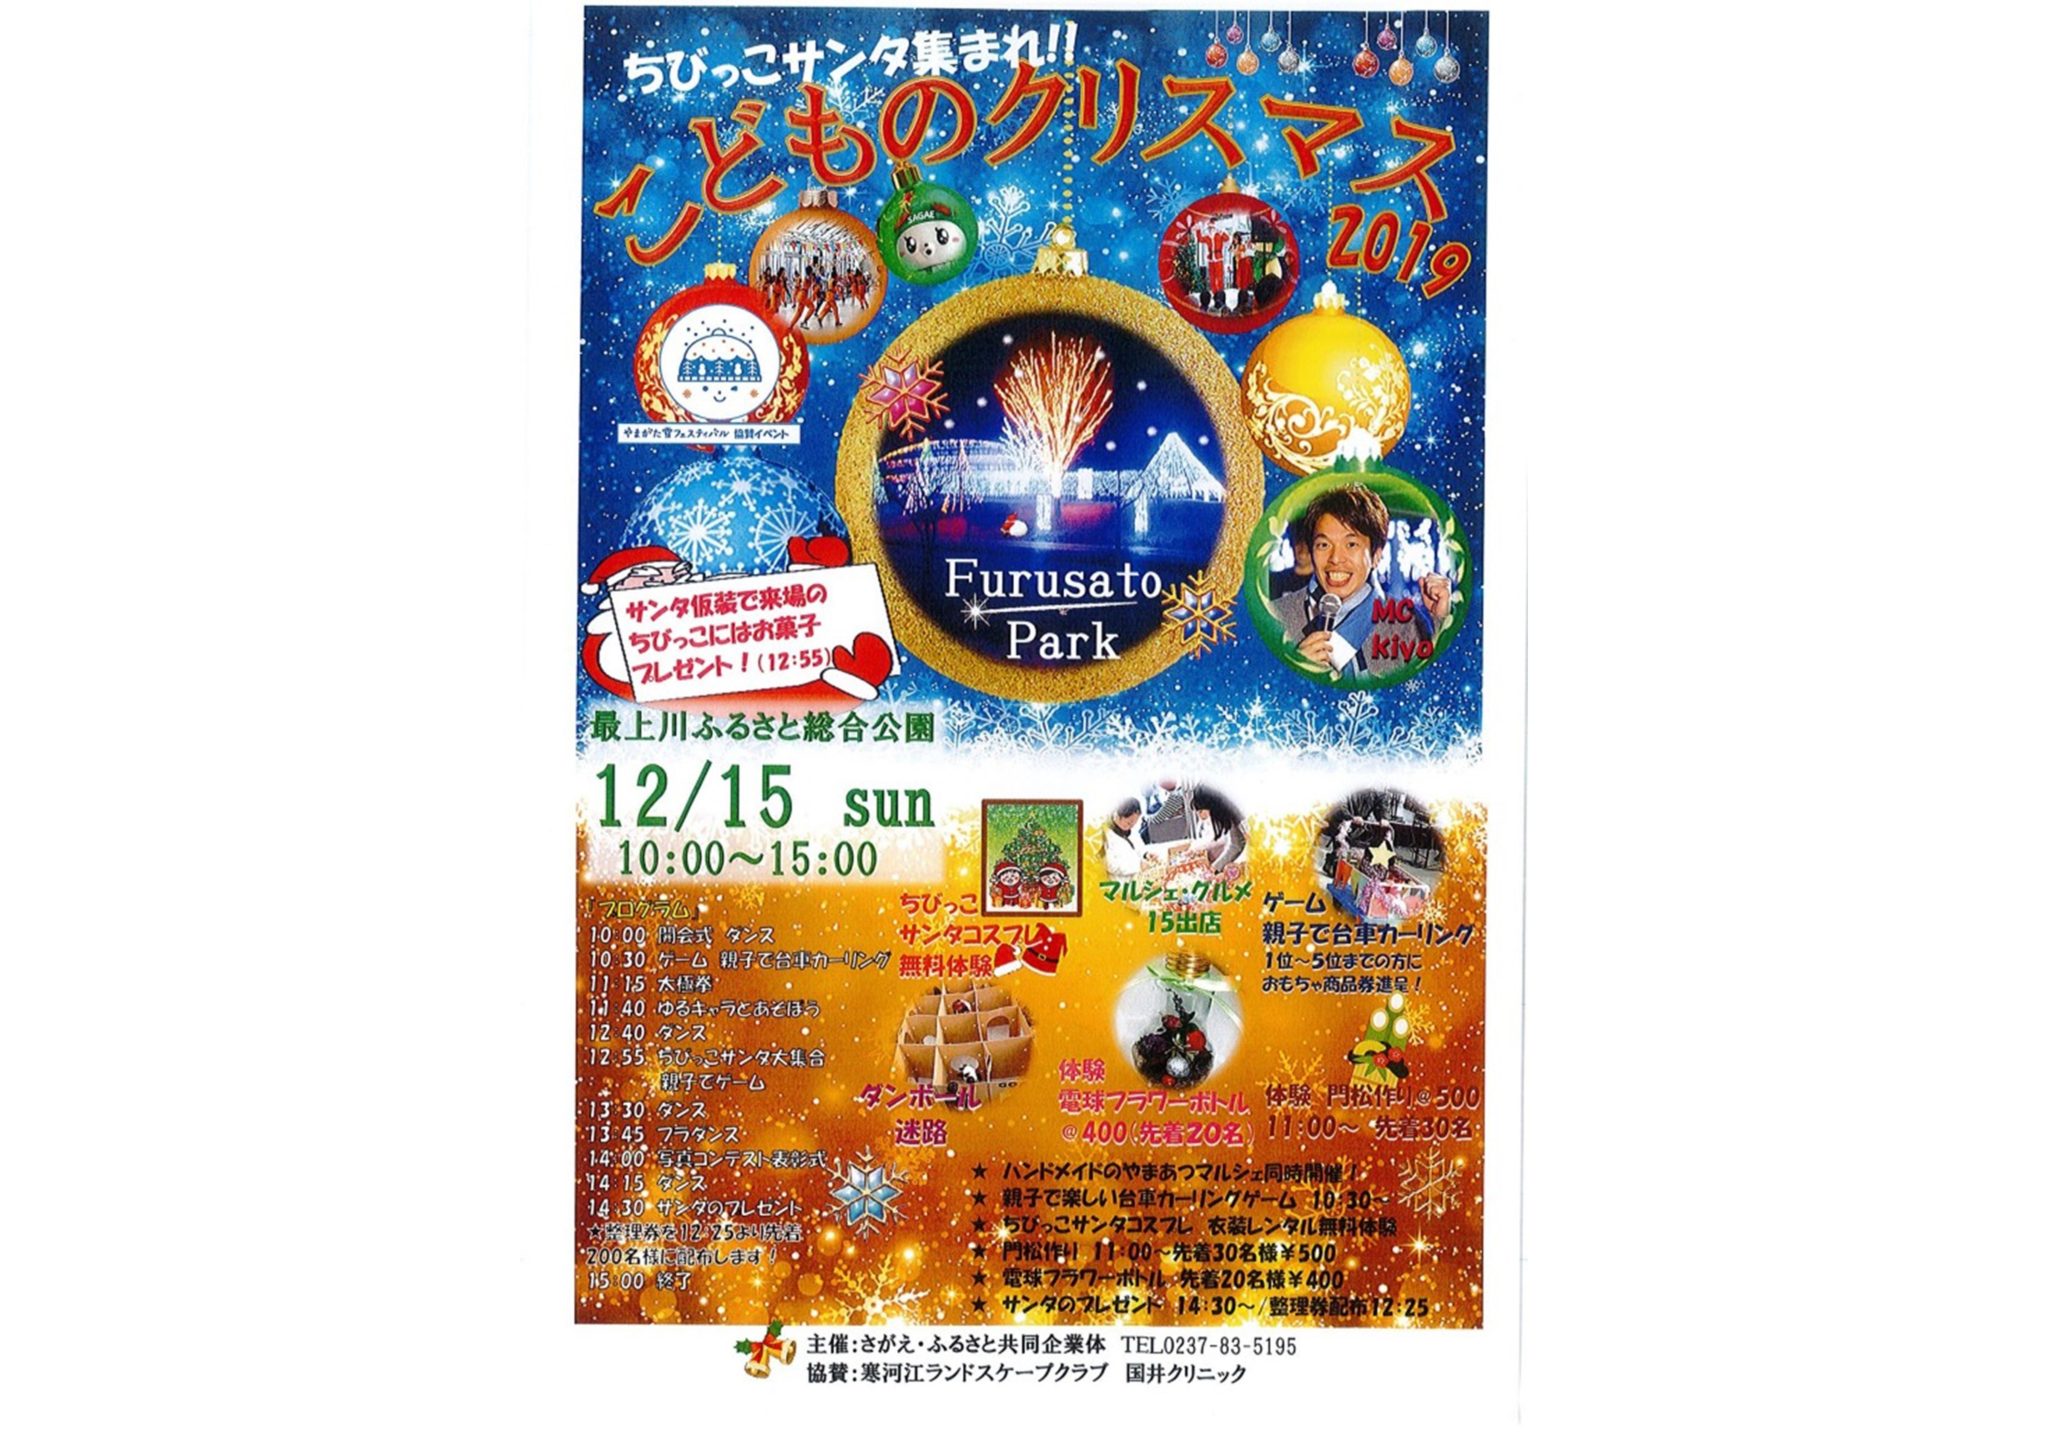 Christmas Party こどものクリスマス in 最上川ふるさと総合公園